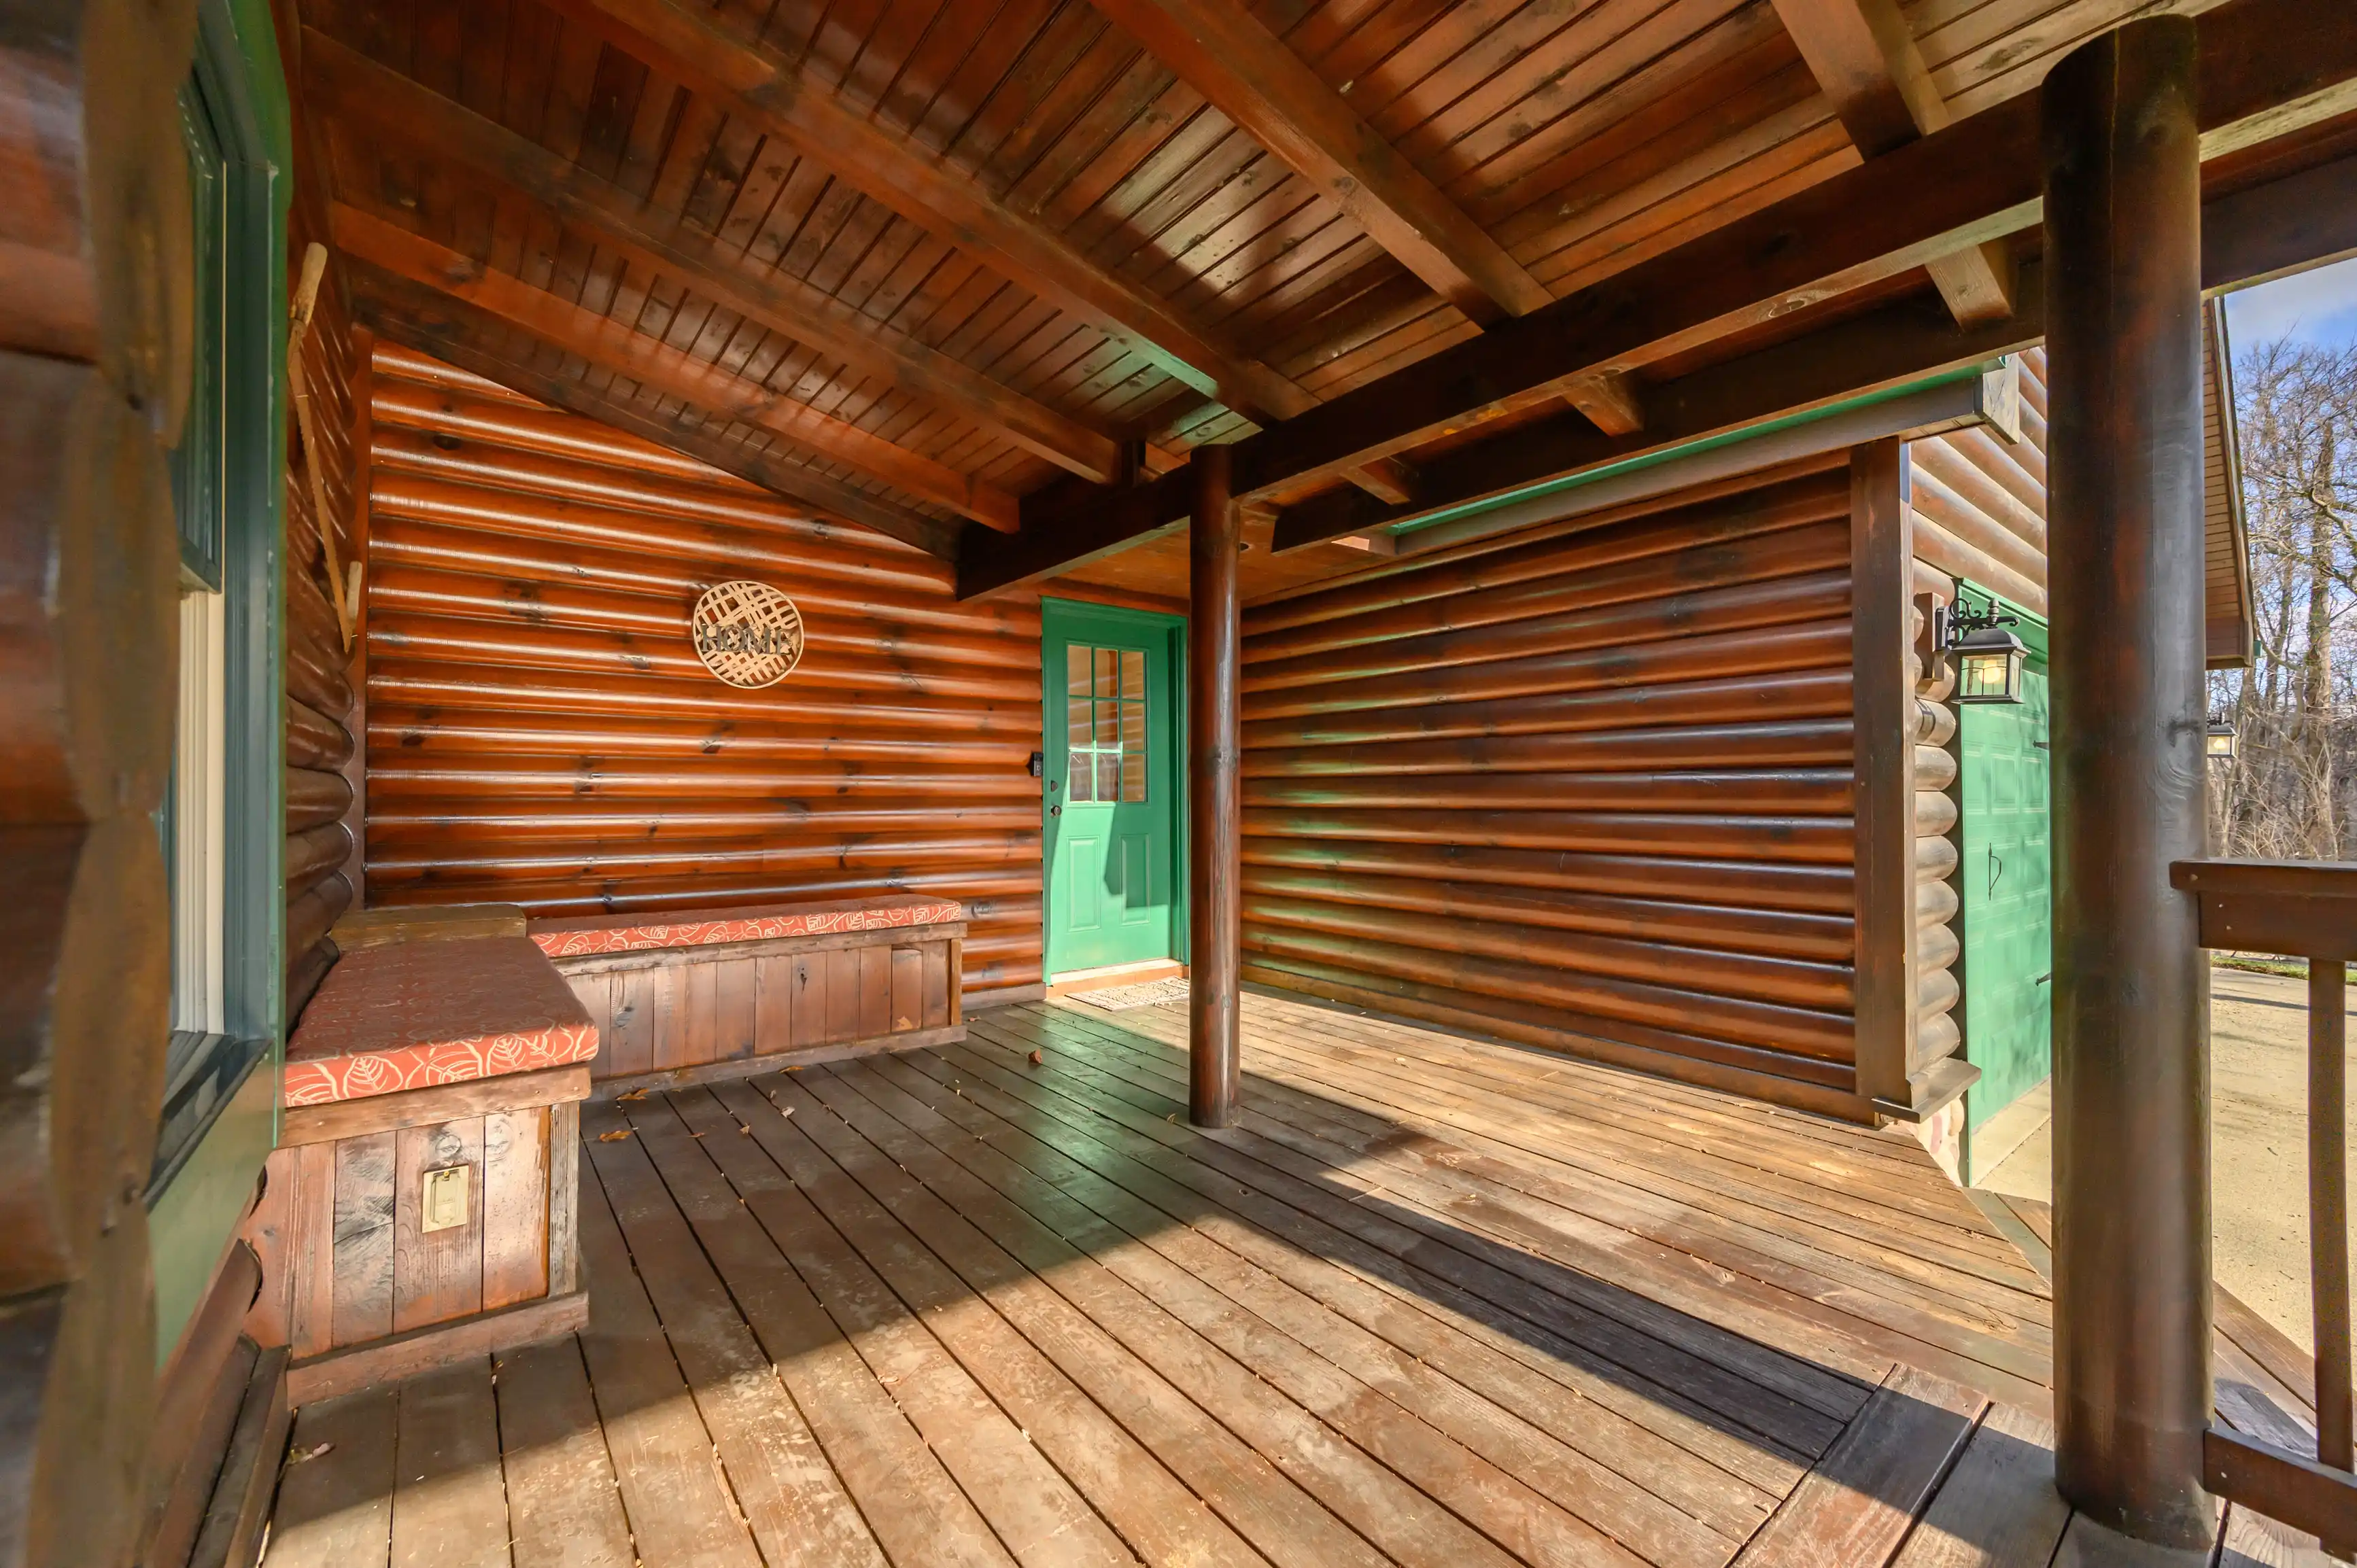 Spacious wooden porch of a log cabin with a bright green door, decorated bench, and intricate carved details along the exterior walls.